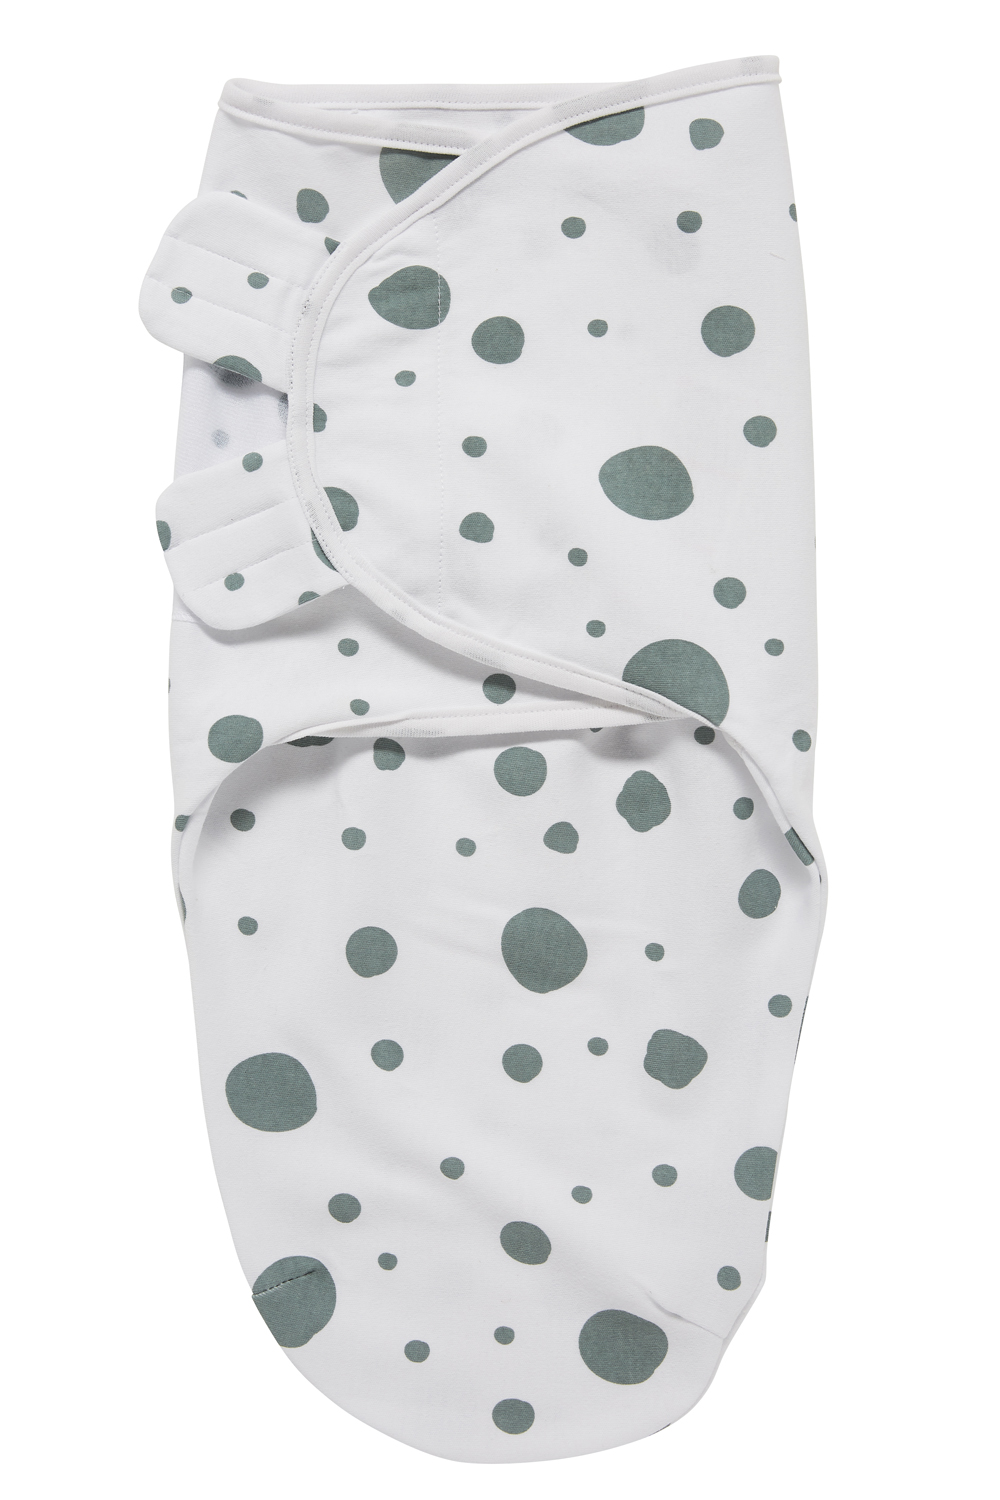 Swaddlemeyco Dots - Stone Green - 0-3 Months